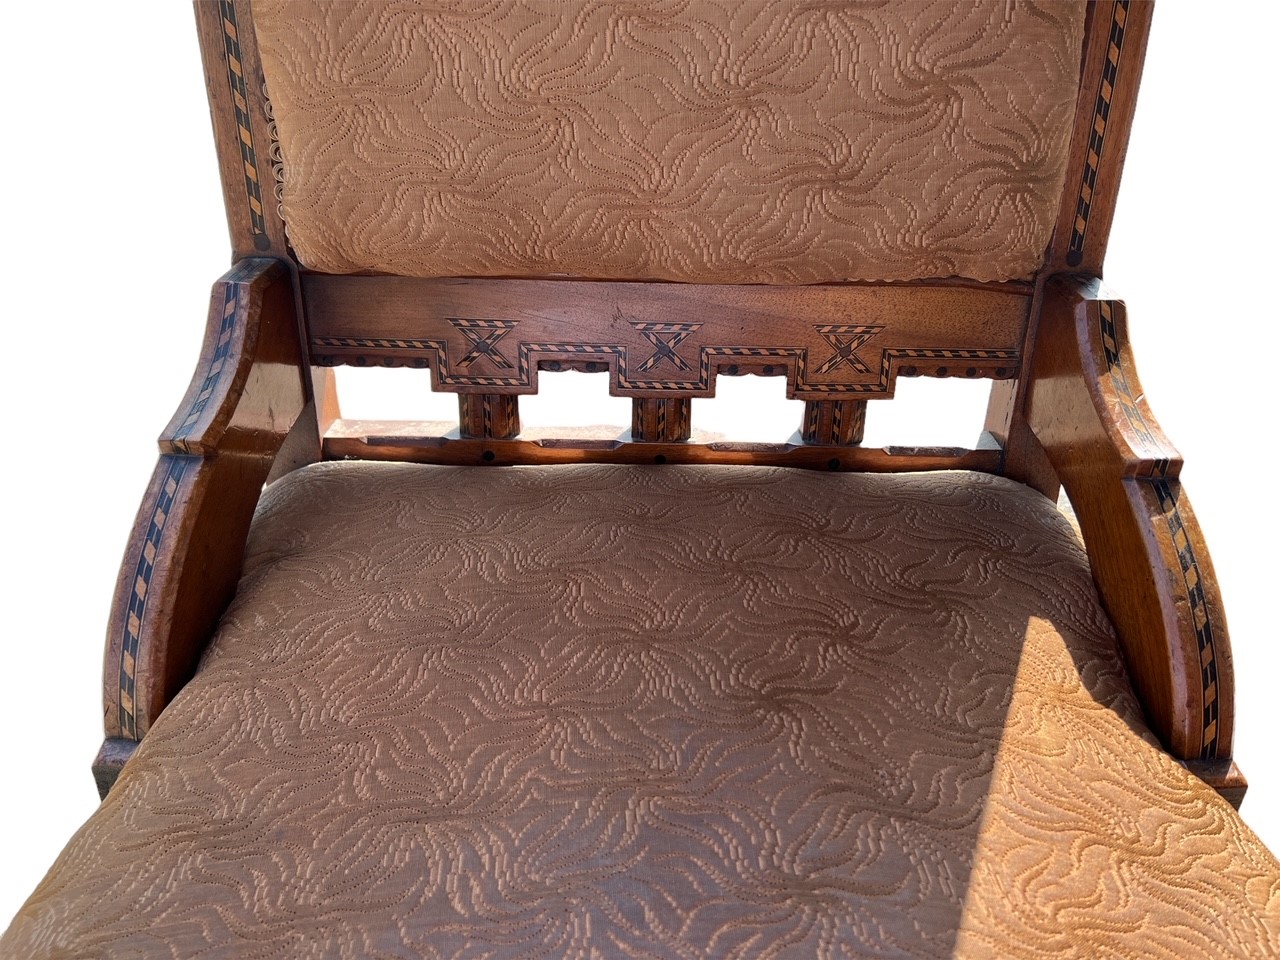 ATTRIBUTED TO CHARLES BEVAN, A GOOD 19TH CENTURY ARTS AND CRAFTS OAK AND INLAID ARMCHAIR. - Image 8 of 8